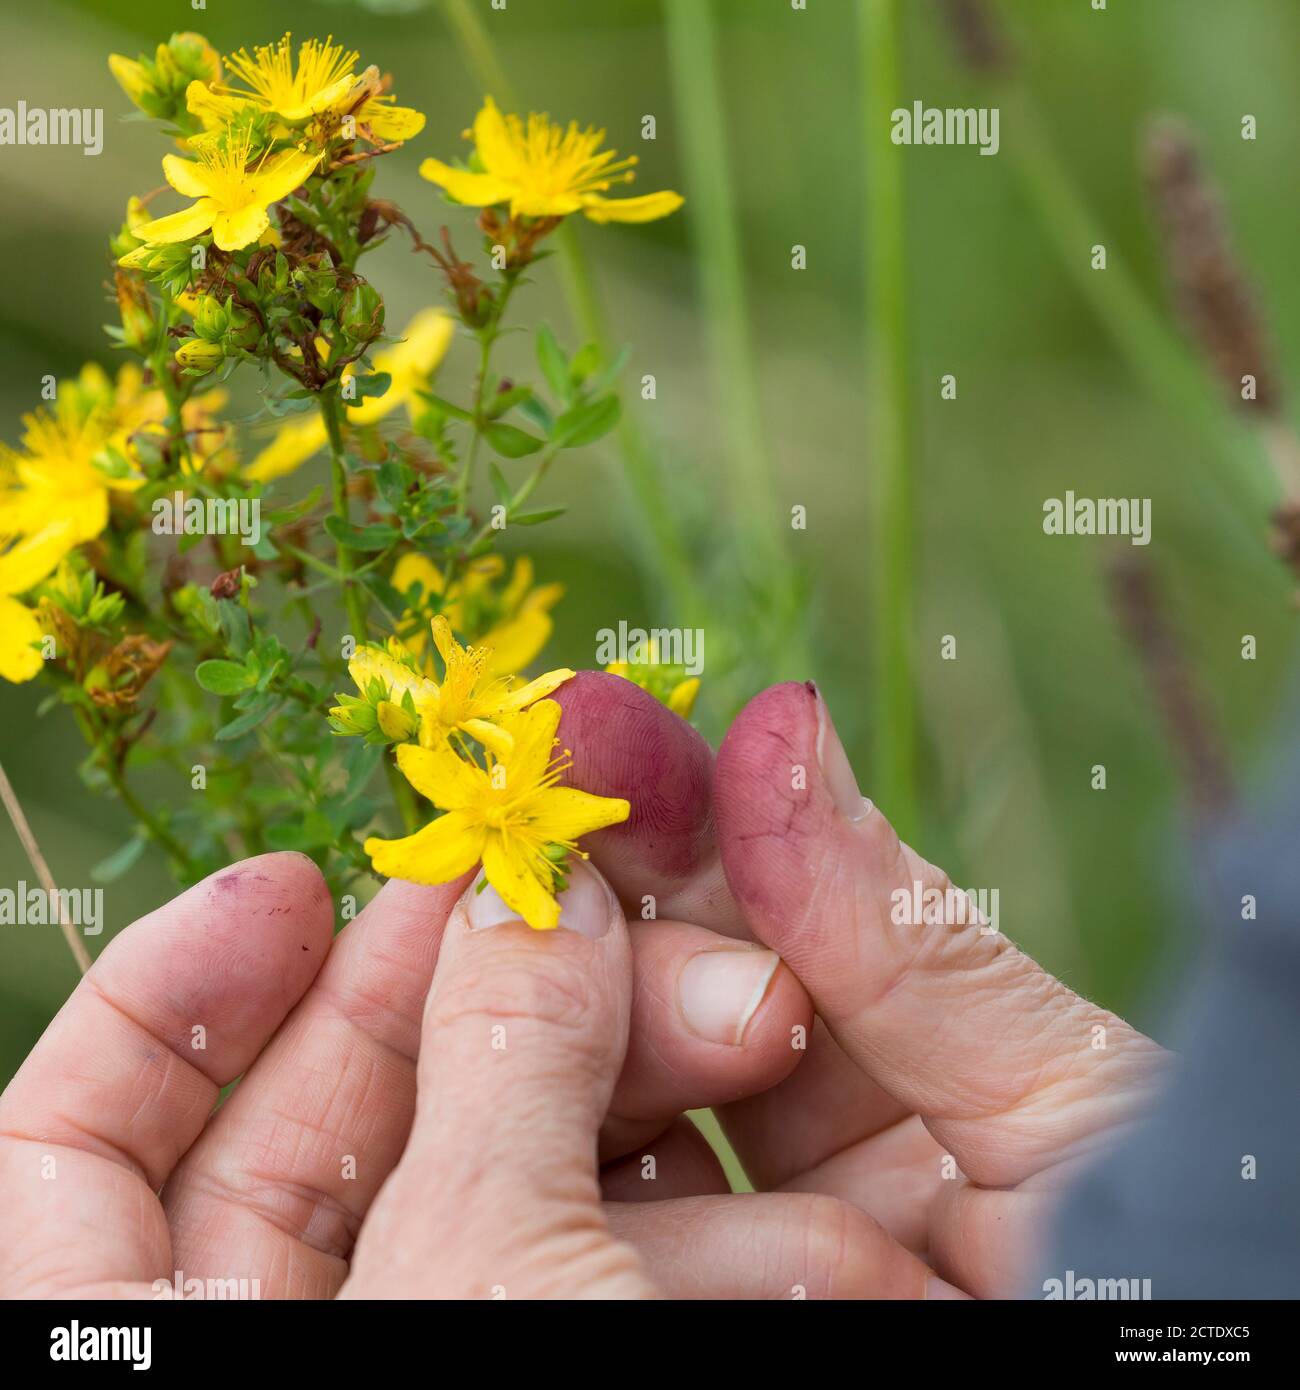 Common St Johns-wort, perforate St Johns-wort, klamath weed, St. Johns-wort (Hypericum perforatum), red color of a grinded flower, Germany Stock Photo